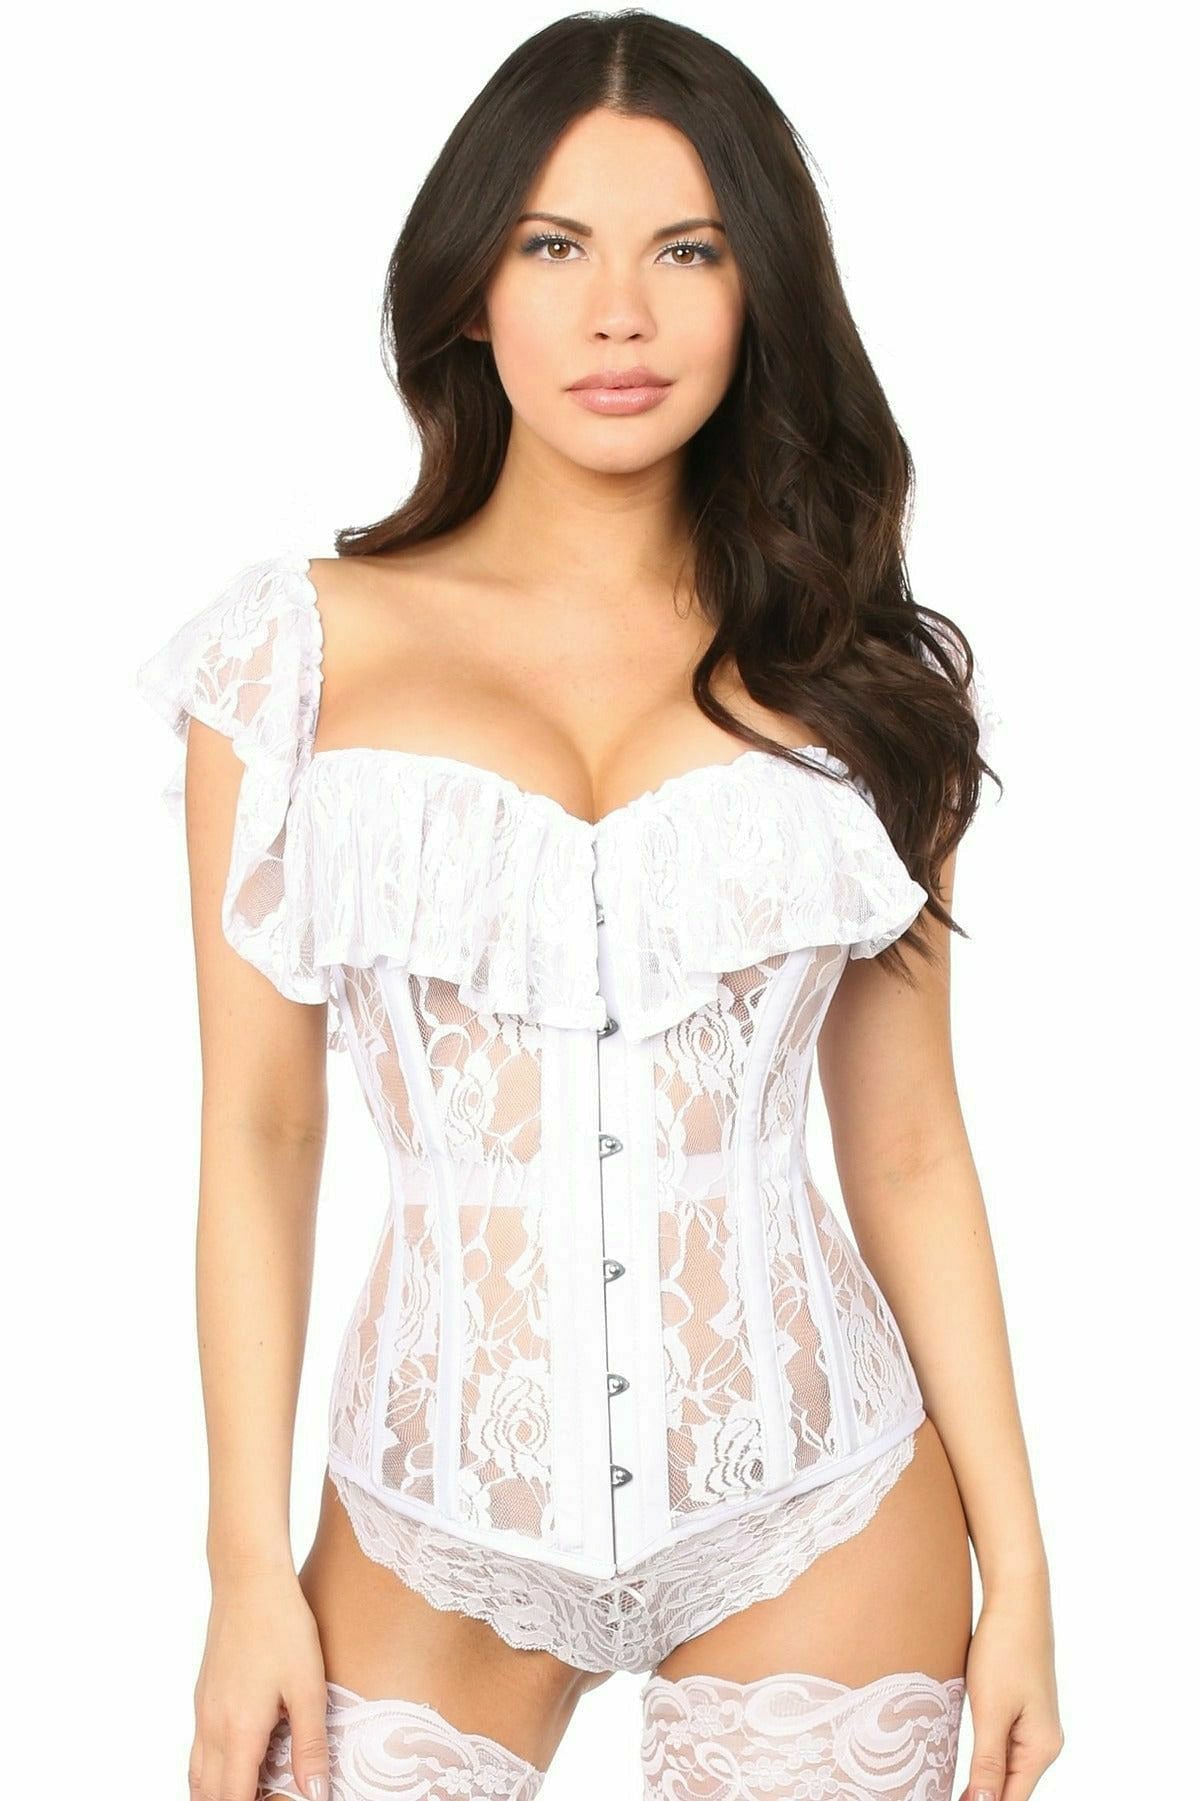 Top Drawer White Sheer Lace Steel Boned Corset - Lust Charm 